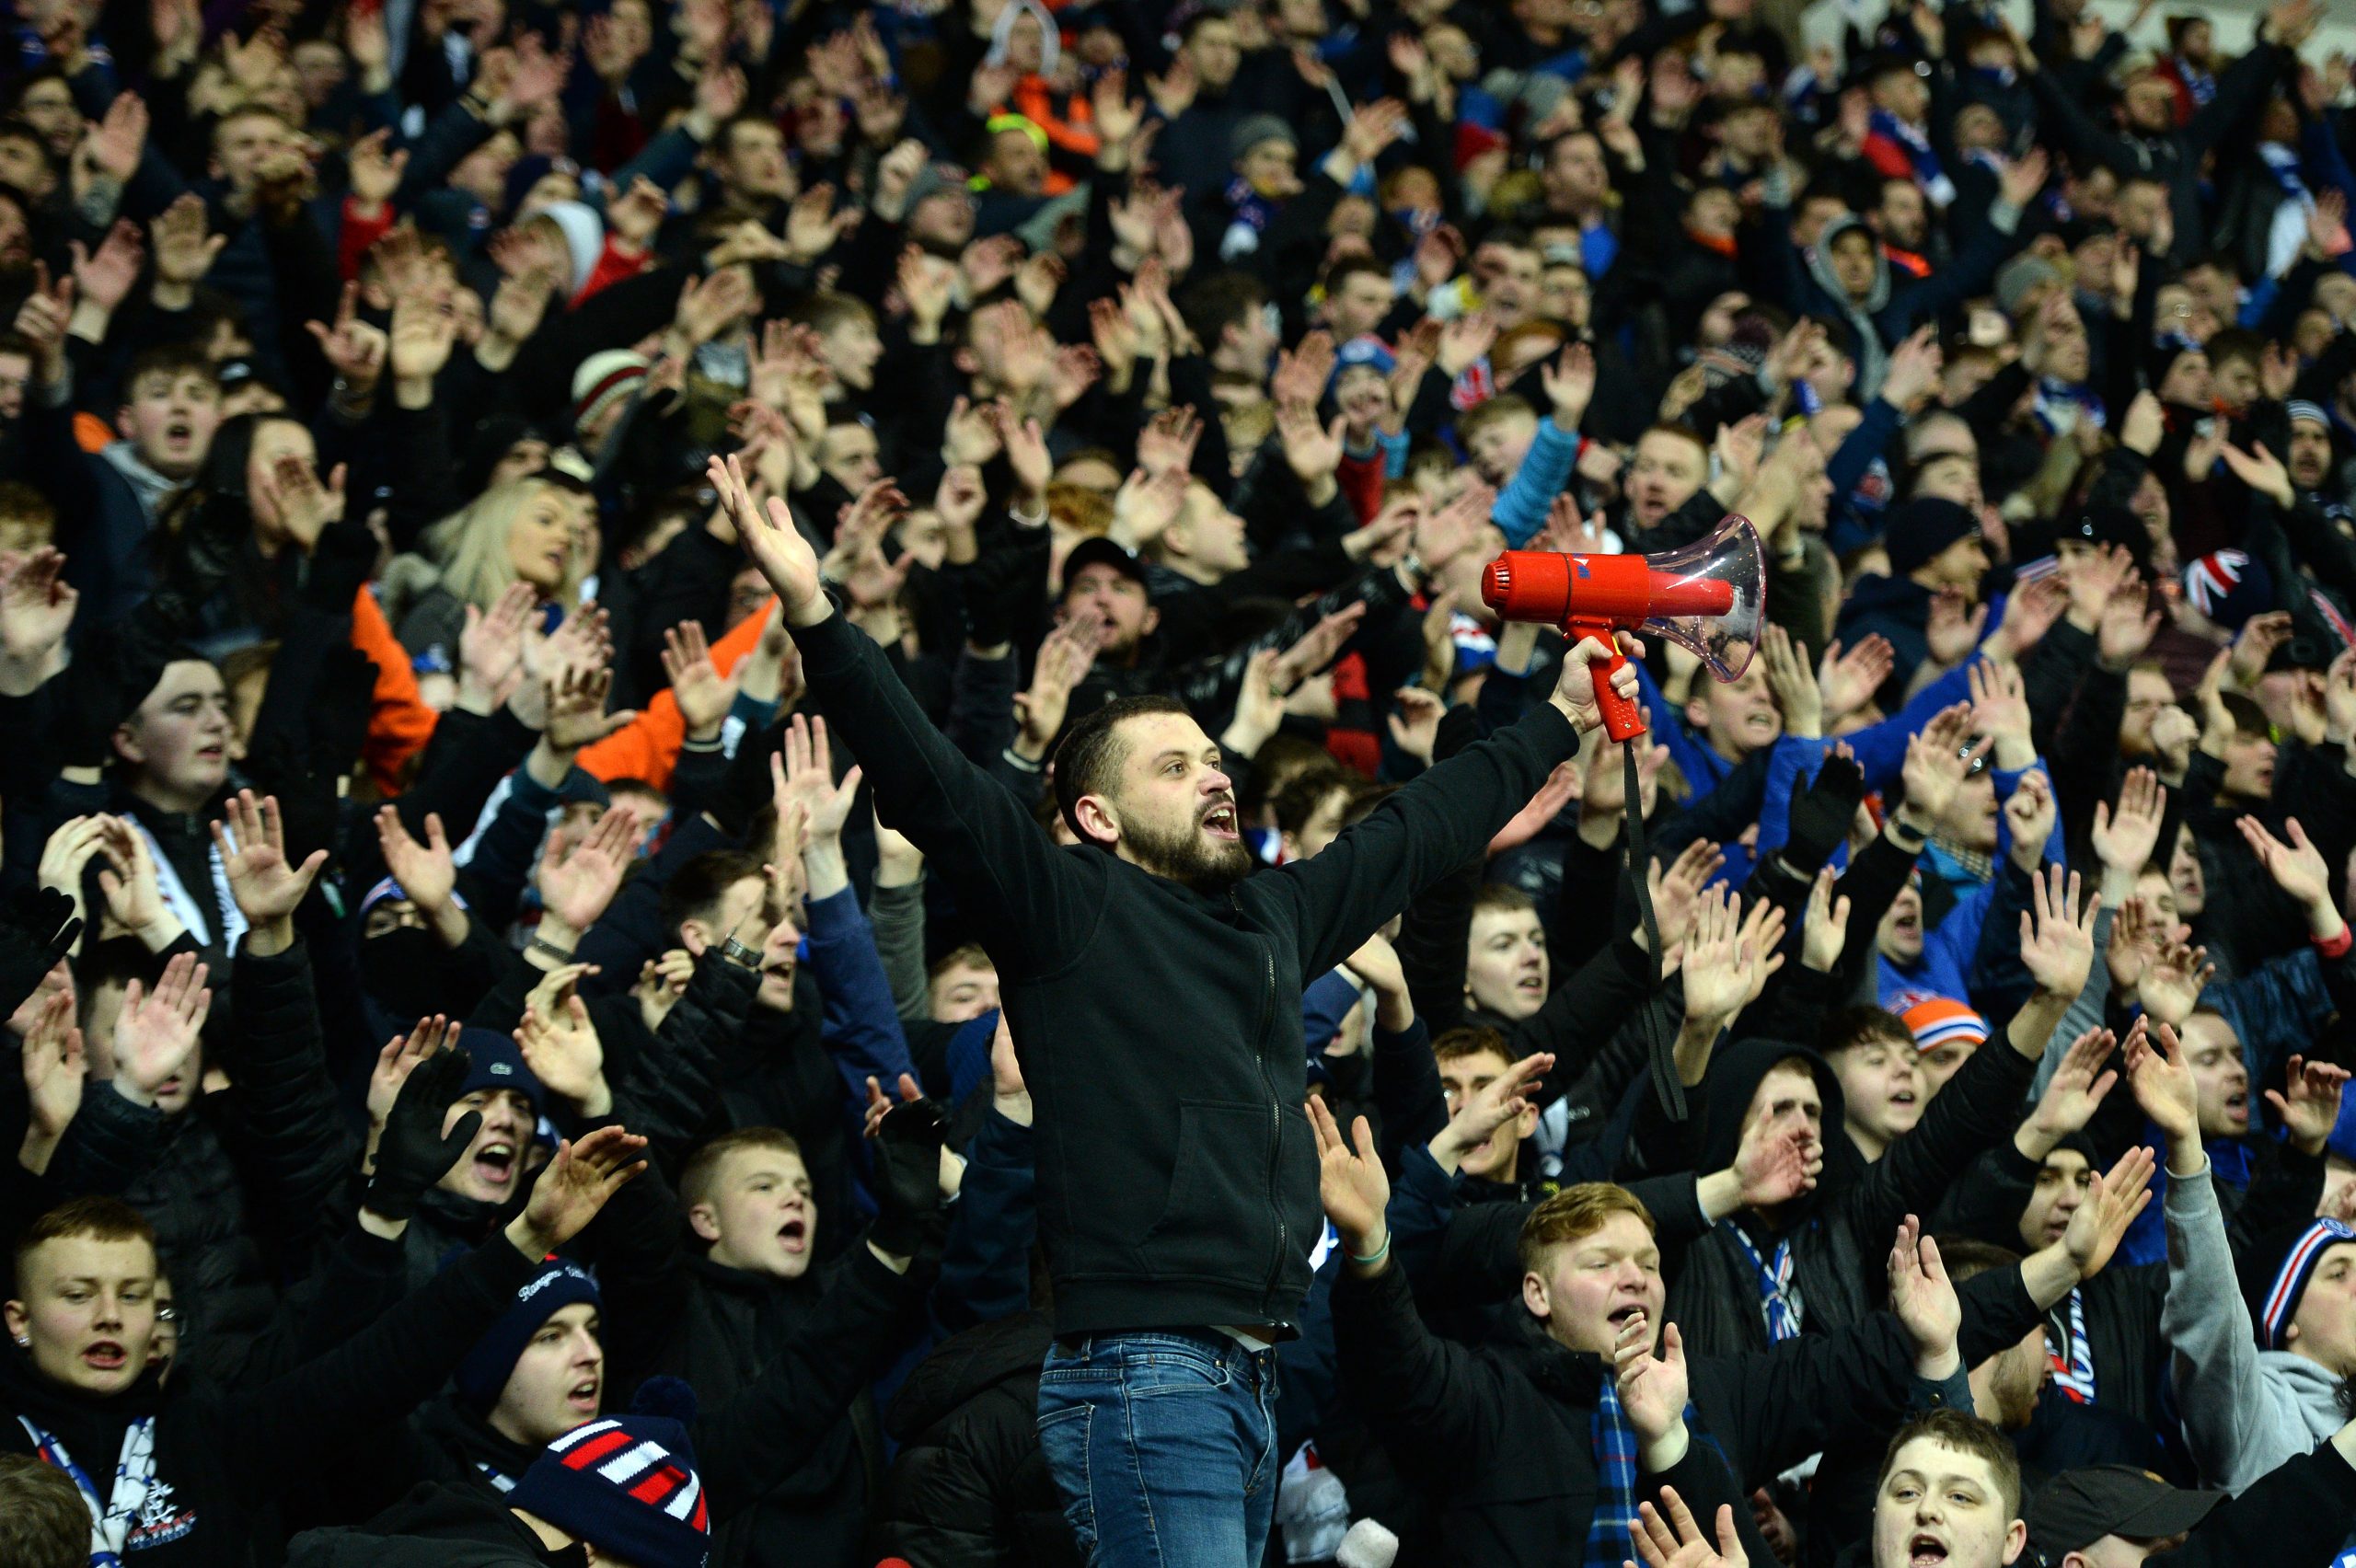 GLASGOW, SCOTLAND - FEBRUARY 20: Rangers fans during the UEFA Europa League round of 32 first leg match between Rangers FC and Sporting Braga at Ibrox Stadium on February 20, 2020 in Glasgow, United Kingdom.